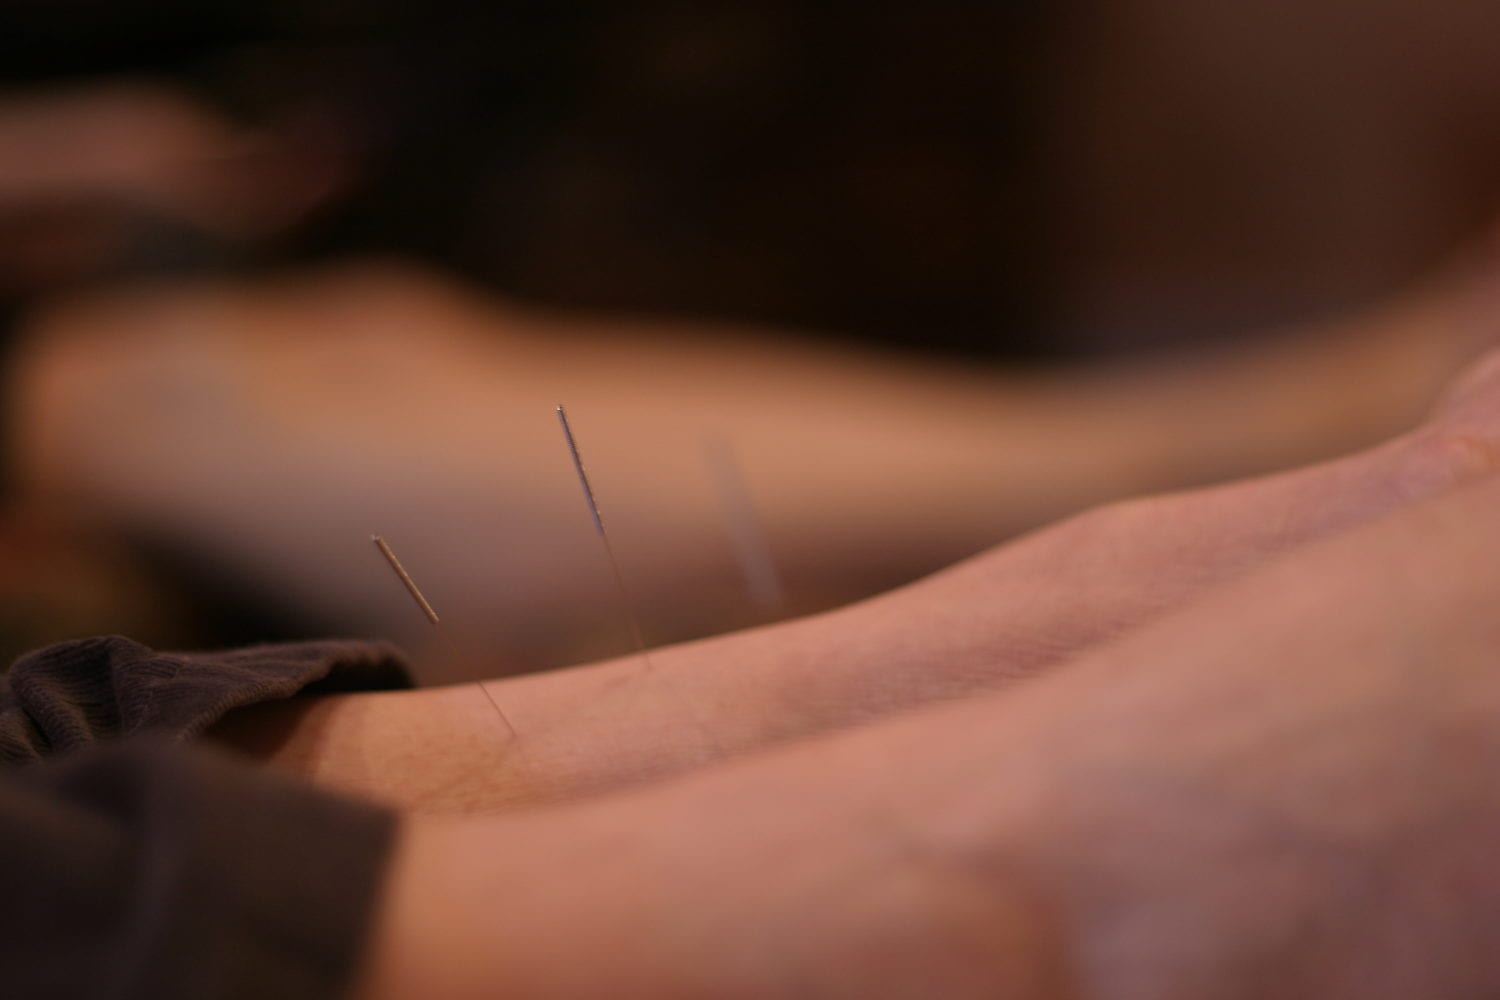 Is Dry Needling or Acupuncture Better For Me?